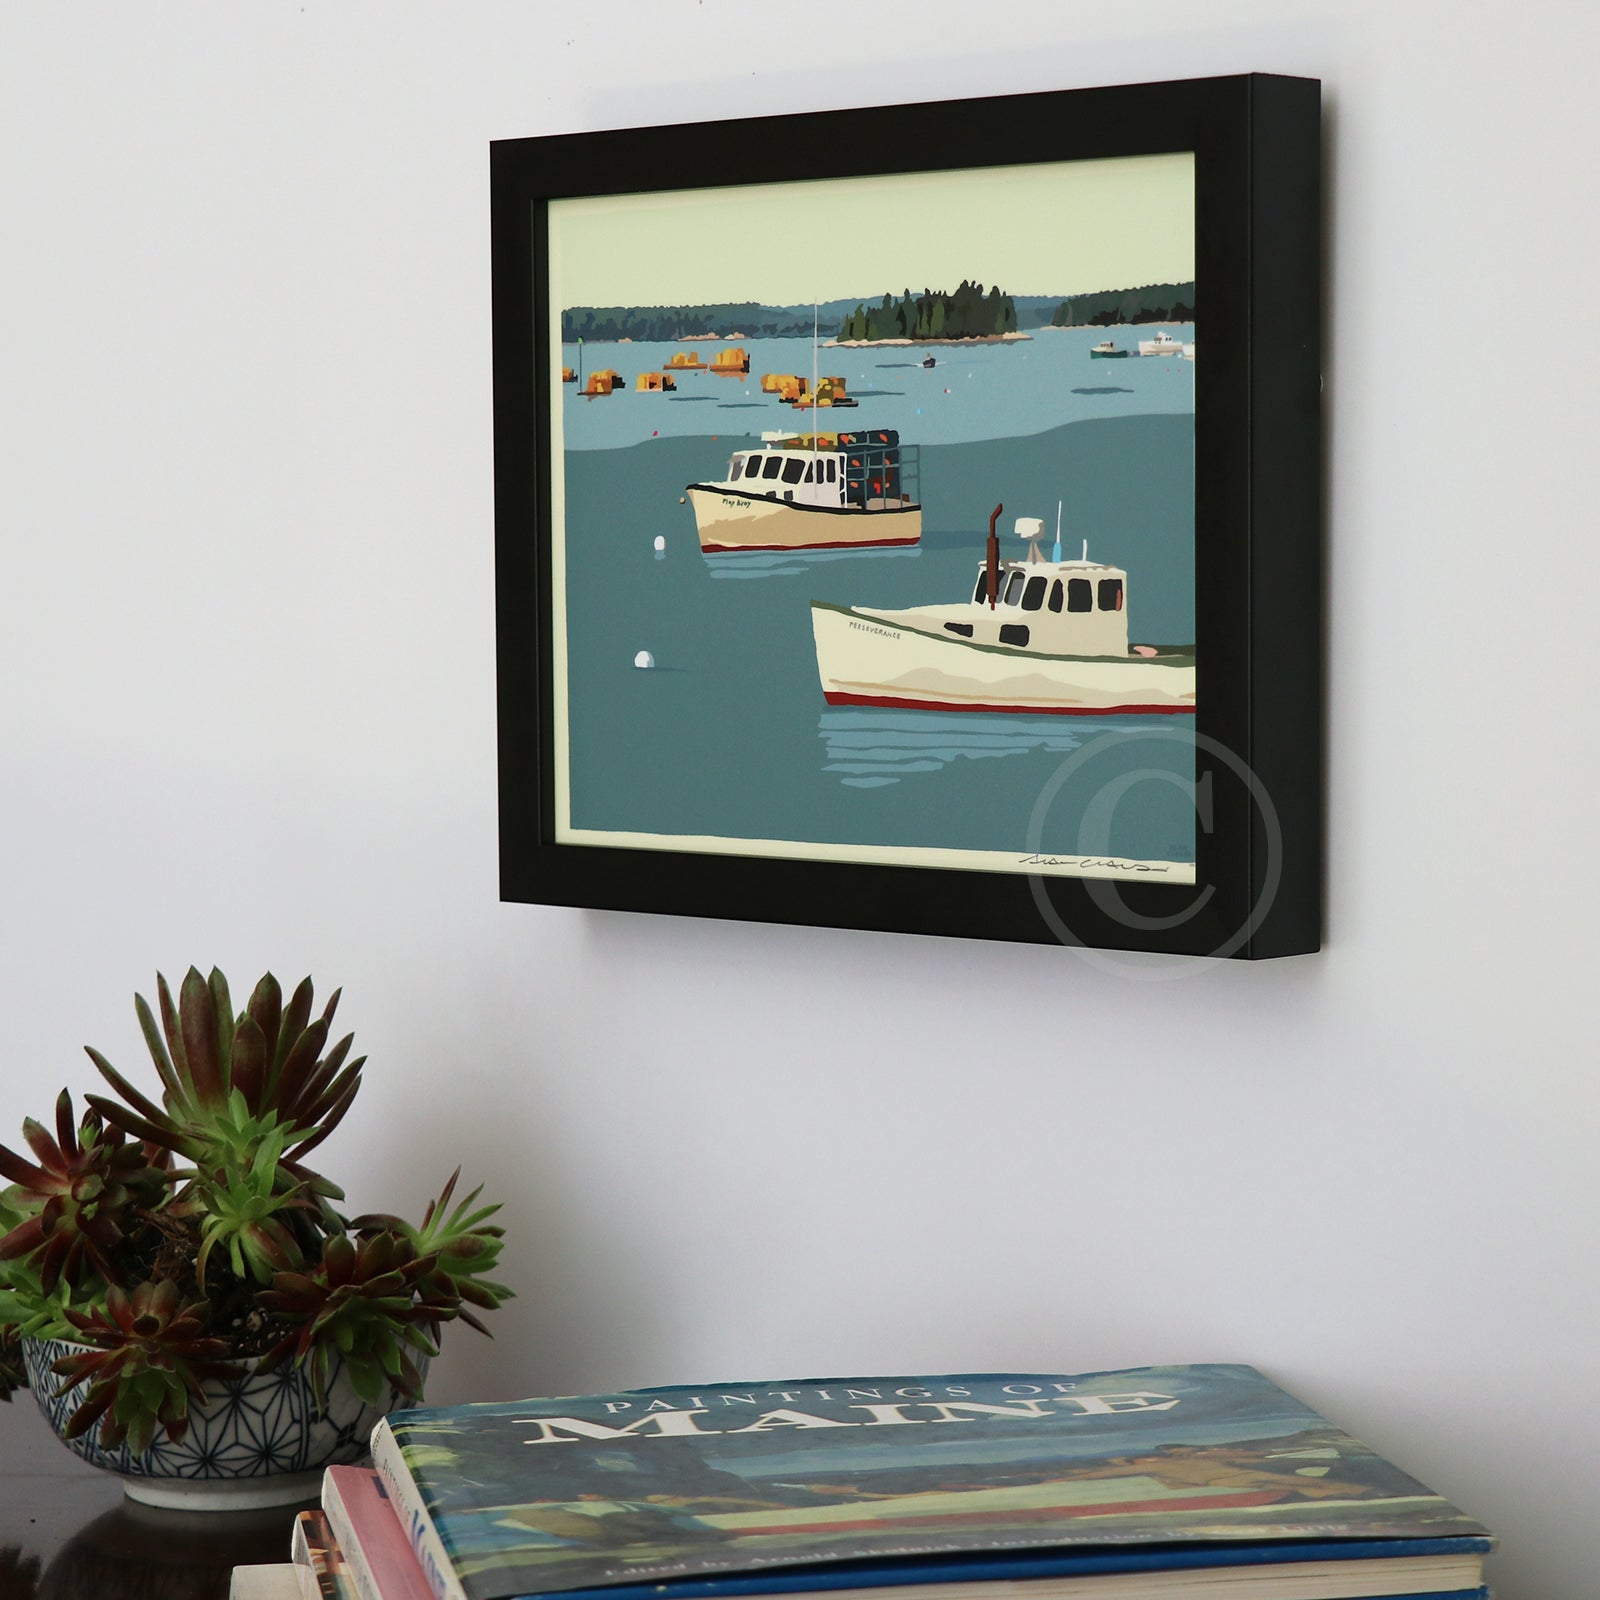 Lobster Boats in Friendship Art Print 8" x 10" Horizontal Framed Wall Poster By Alan Claude - Maine